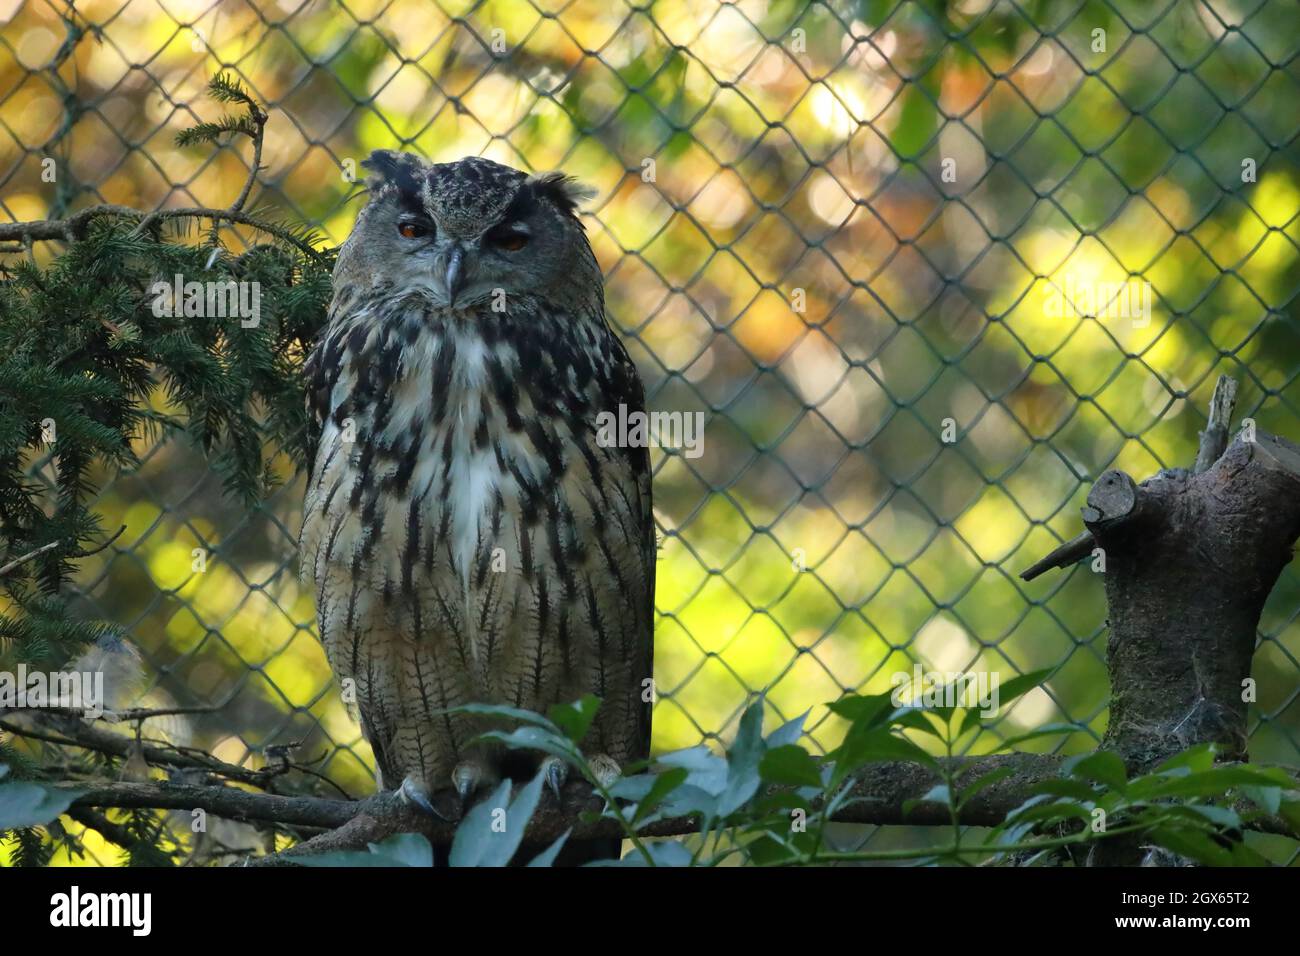 The majestic Eagle owl sitting on the branch. Wildlife photo. Stock Photo